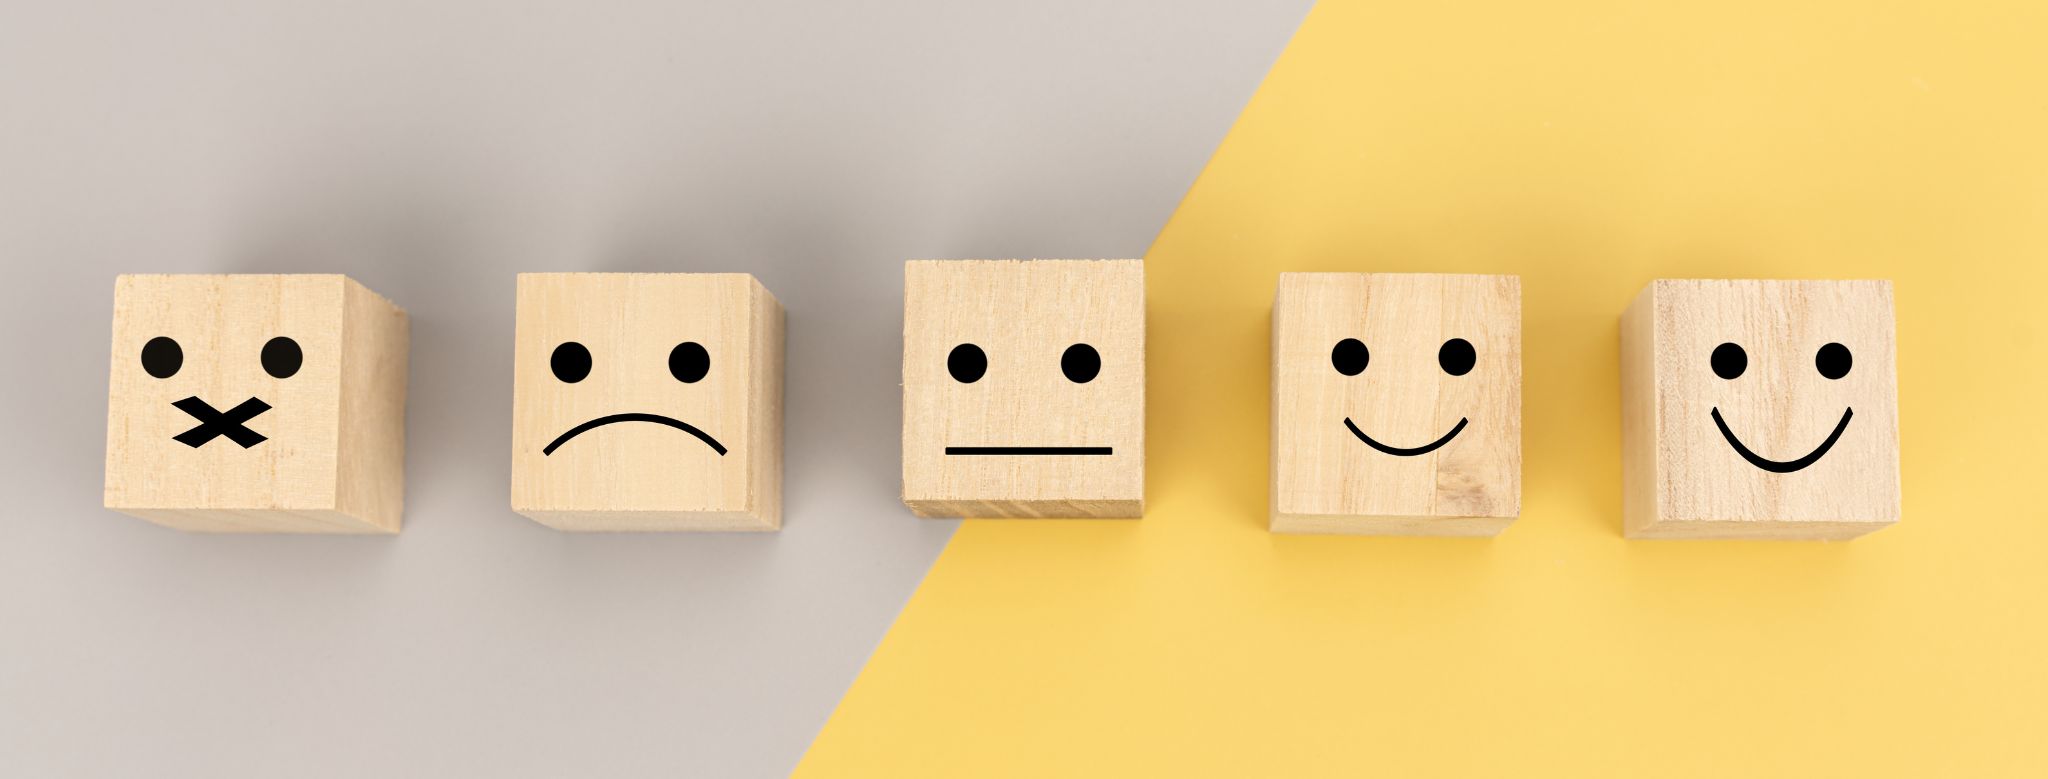 5 boxes displaying five emotions, as they are measured in the employee well-being survey